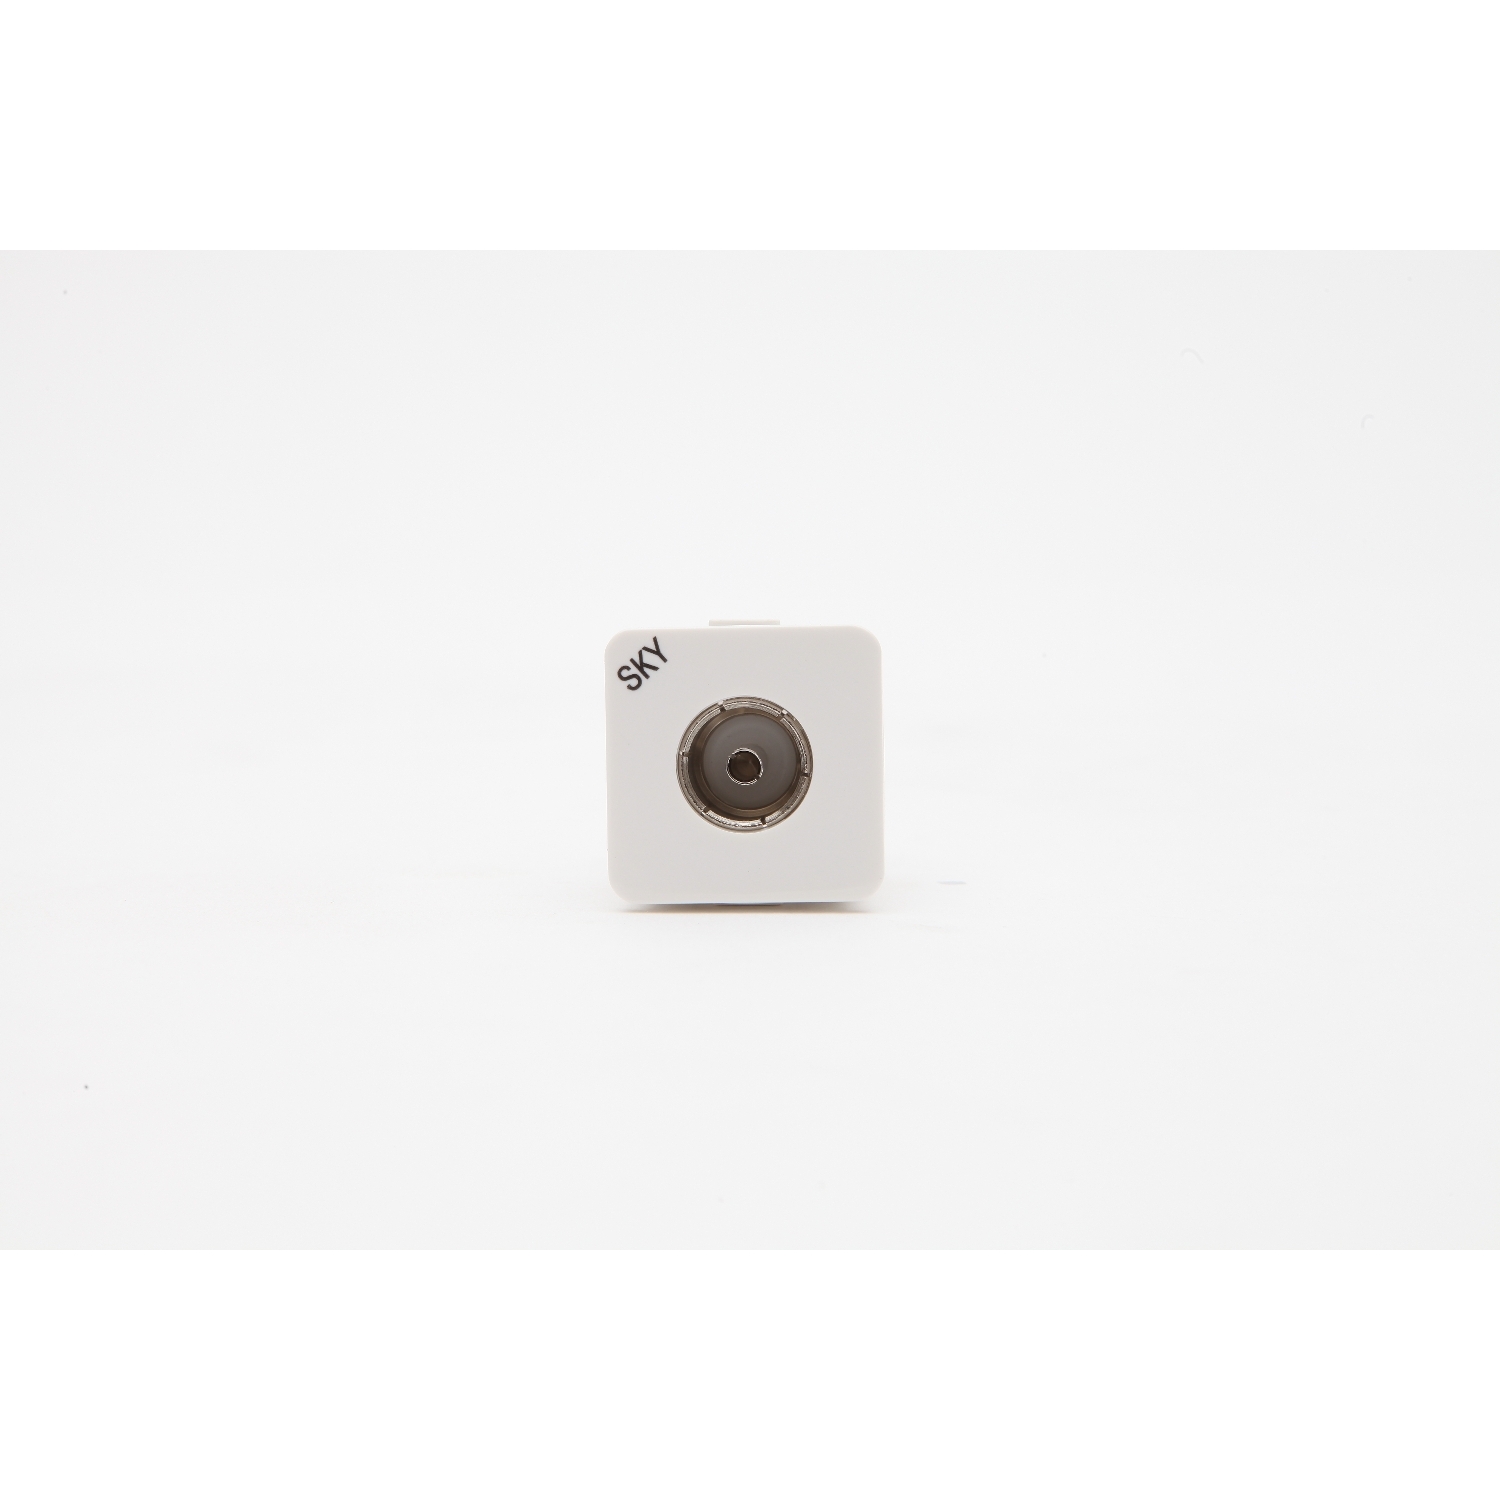 PDL 600 Series - Module Coaxial Cable Television Socket SKY Legend - White